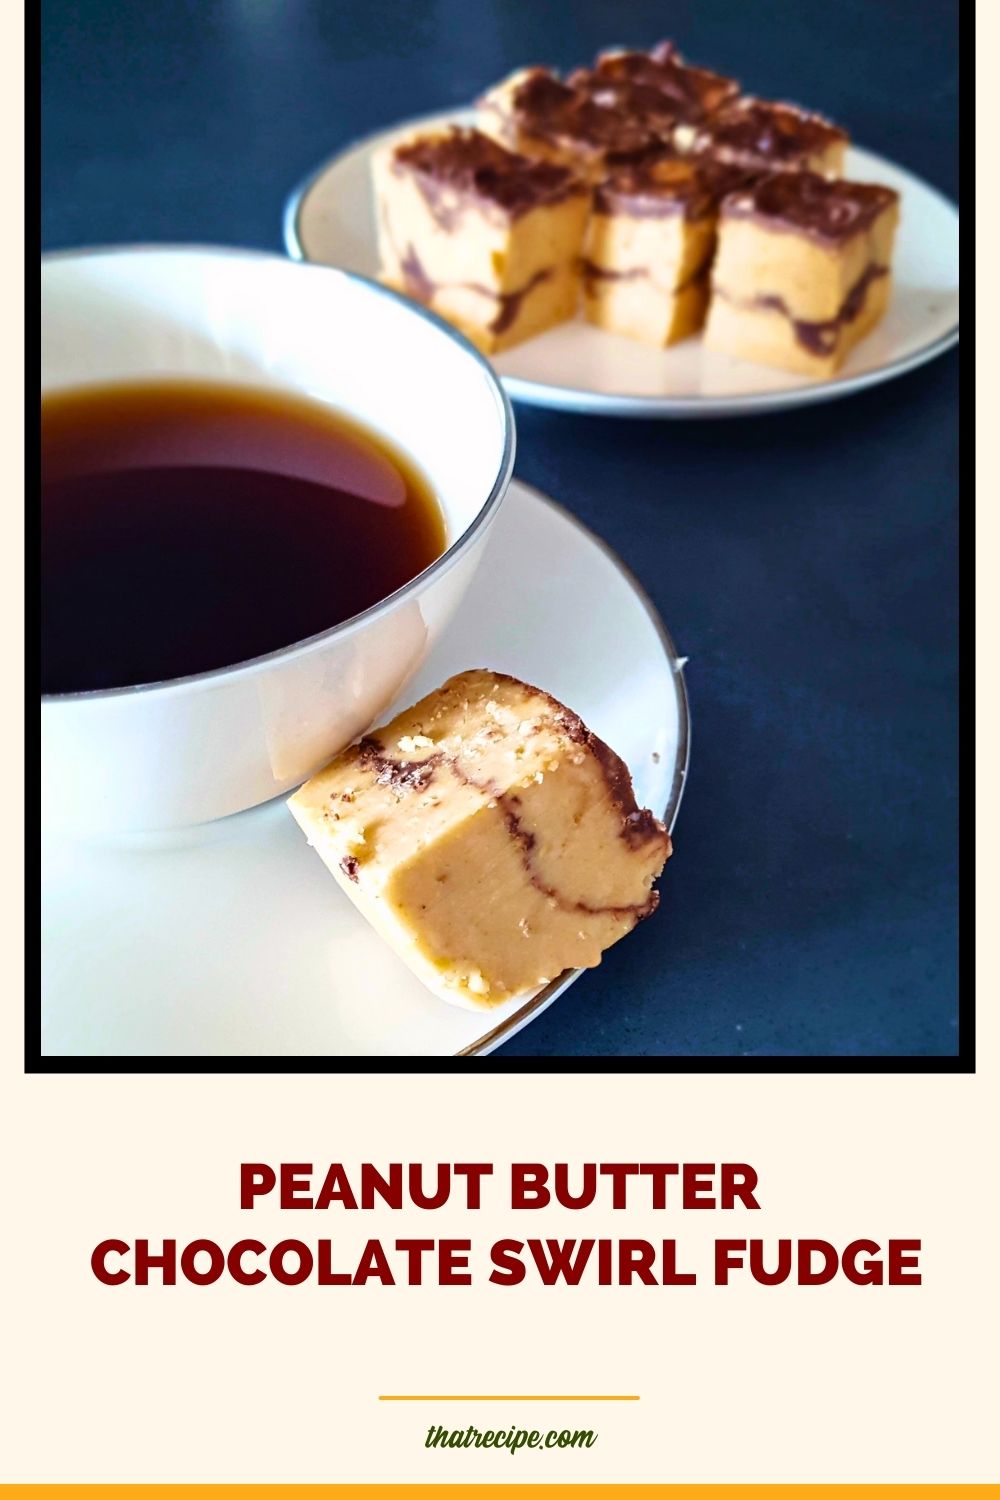 peanut butter chocolate fudge with a cup of coffee